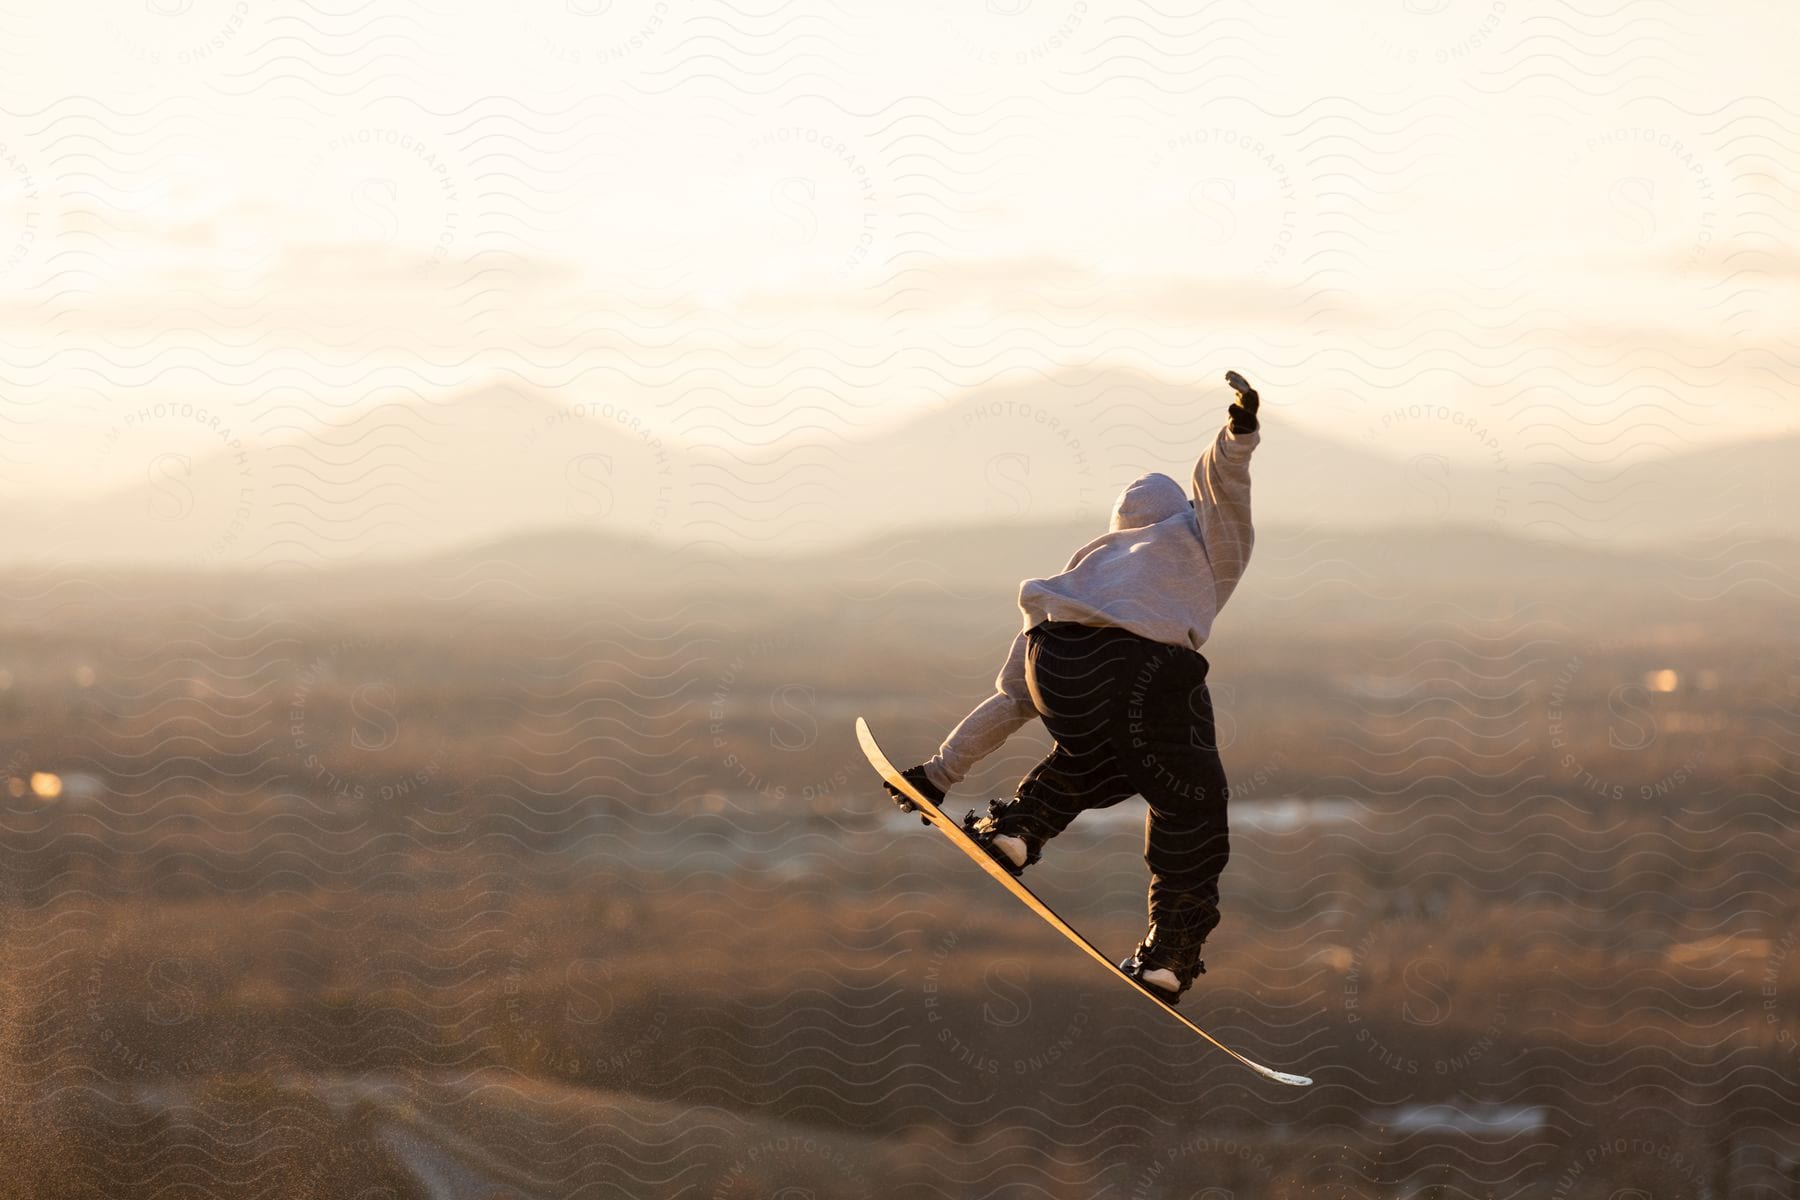 a man on a snowboard up in the air while performing a stunt during spring in an area with a mountain in distance